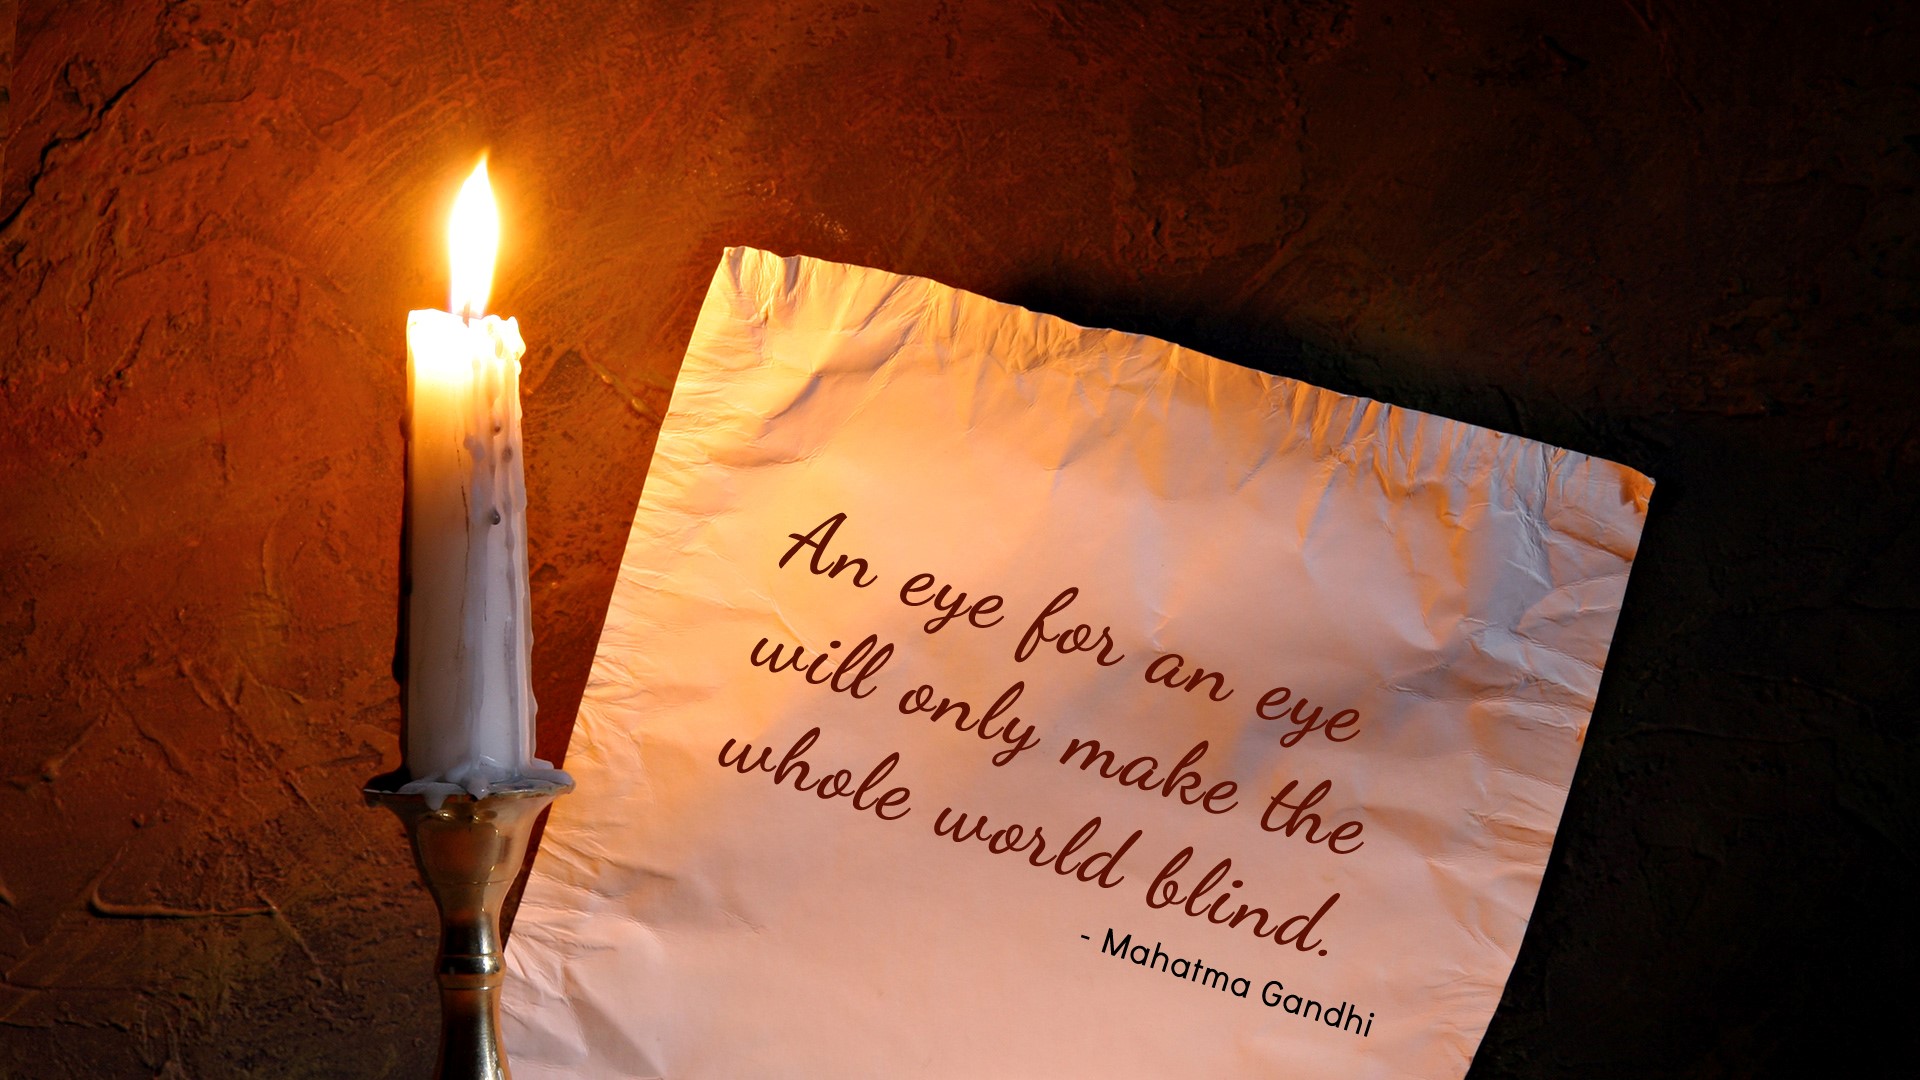 Mahatma Gandhi Quote For Peace Hd Wallpaper - Background With Old Paper Candle - HD Wallpaper 